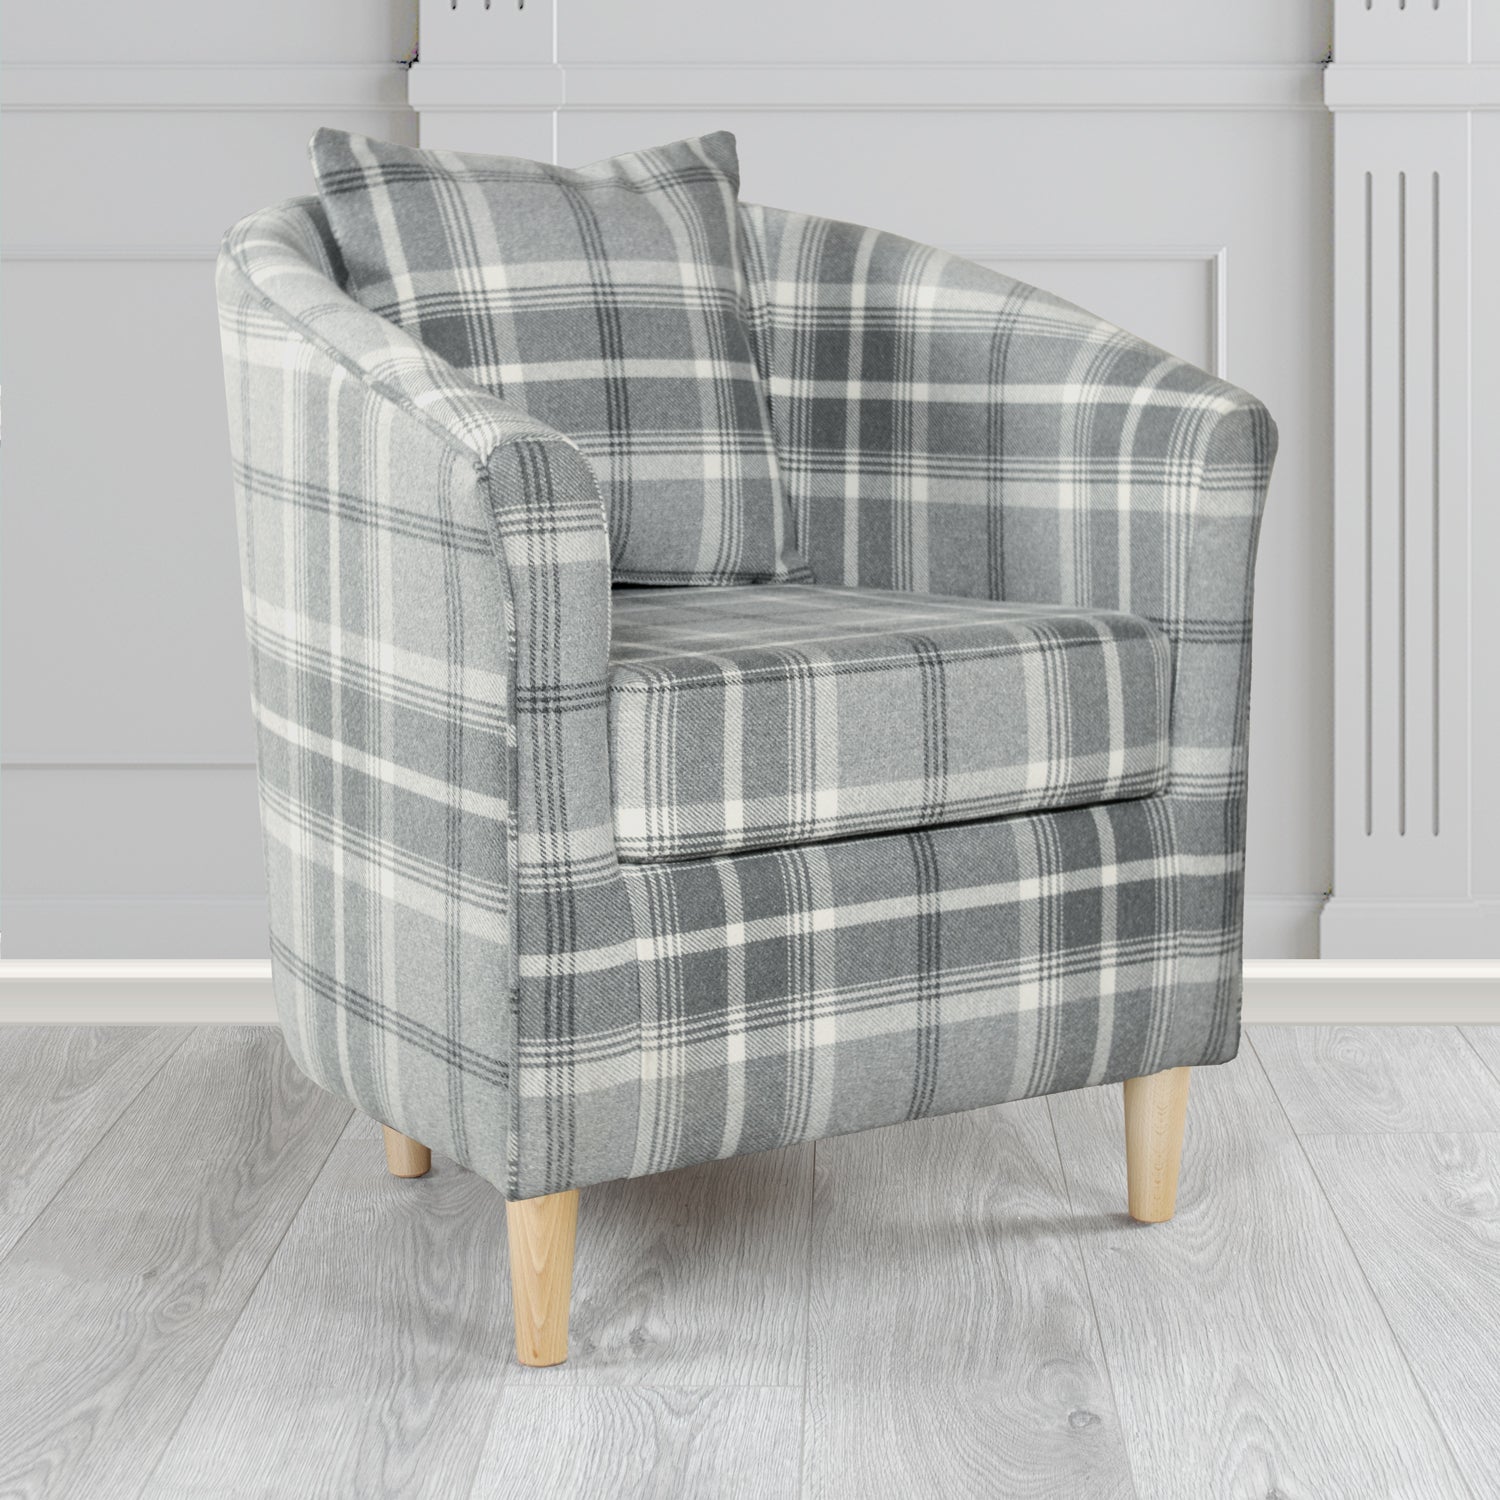 St Tropez Balmoral Dove Grey Check Tartan Fabric Tub Chair with Scatter Cushion (6627061039146)